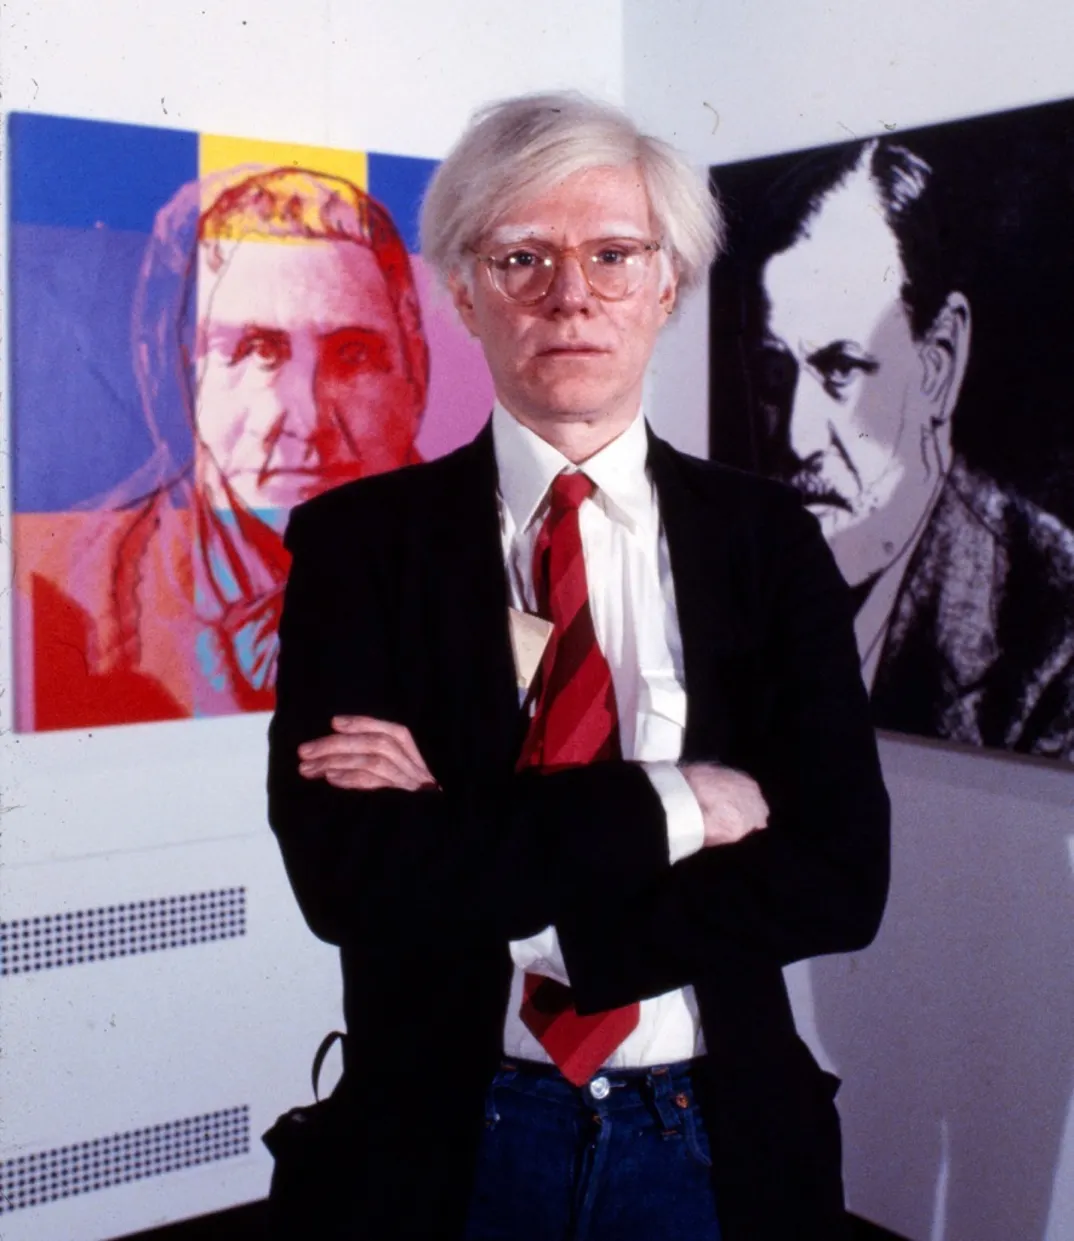 Warhol standing in front of his prints of Sigmund Freud and Gertrude Stein.